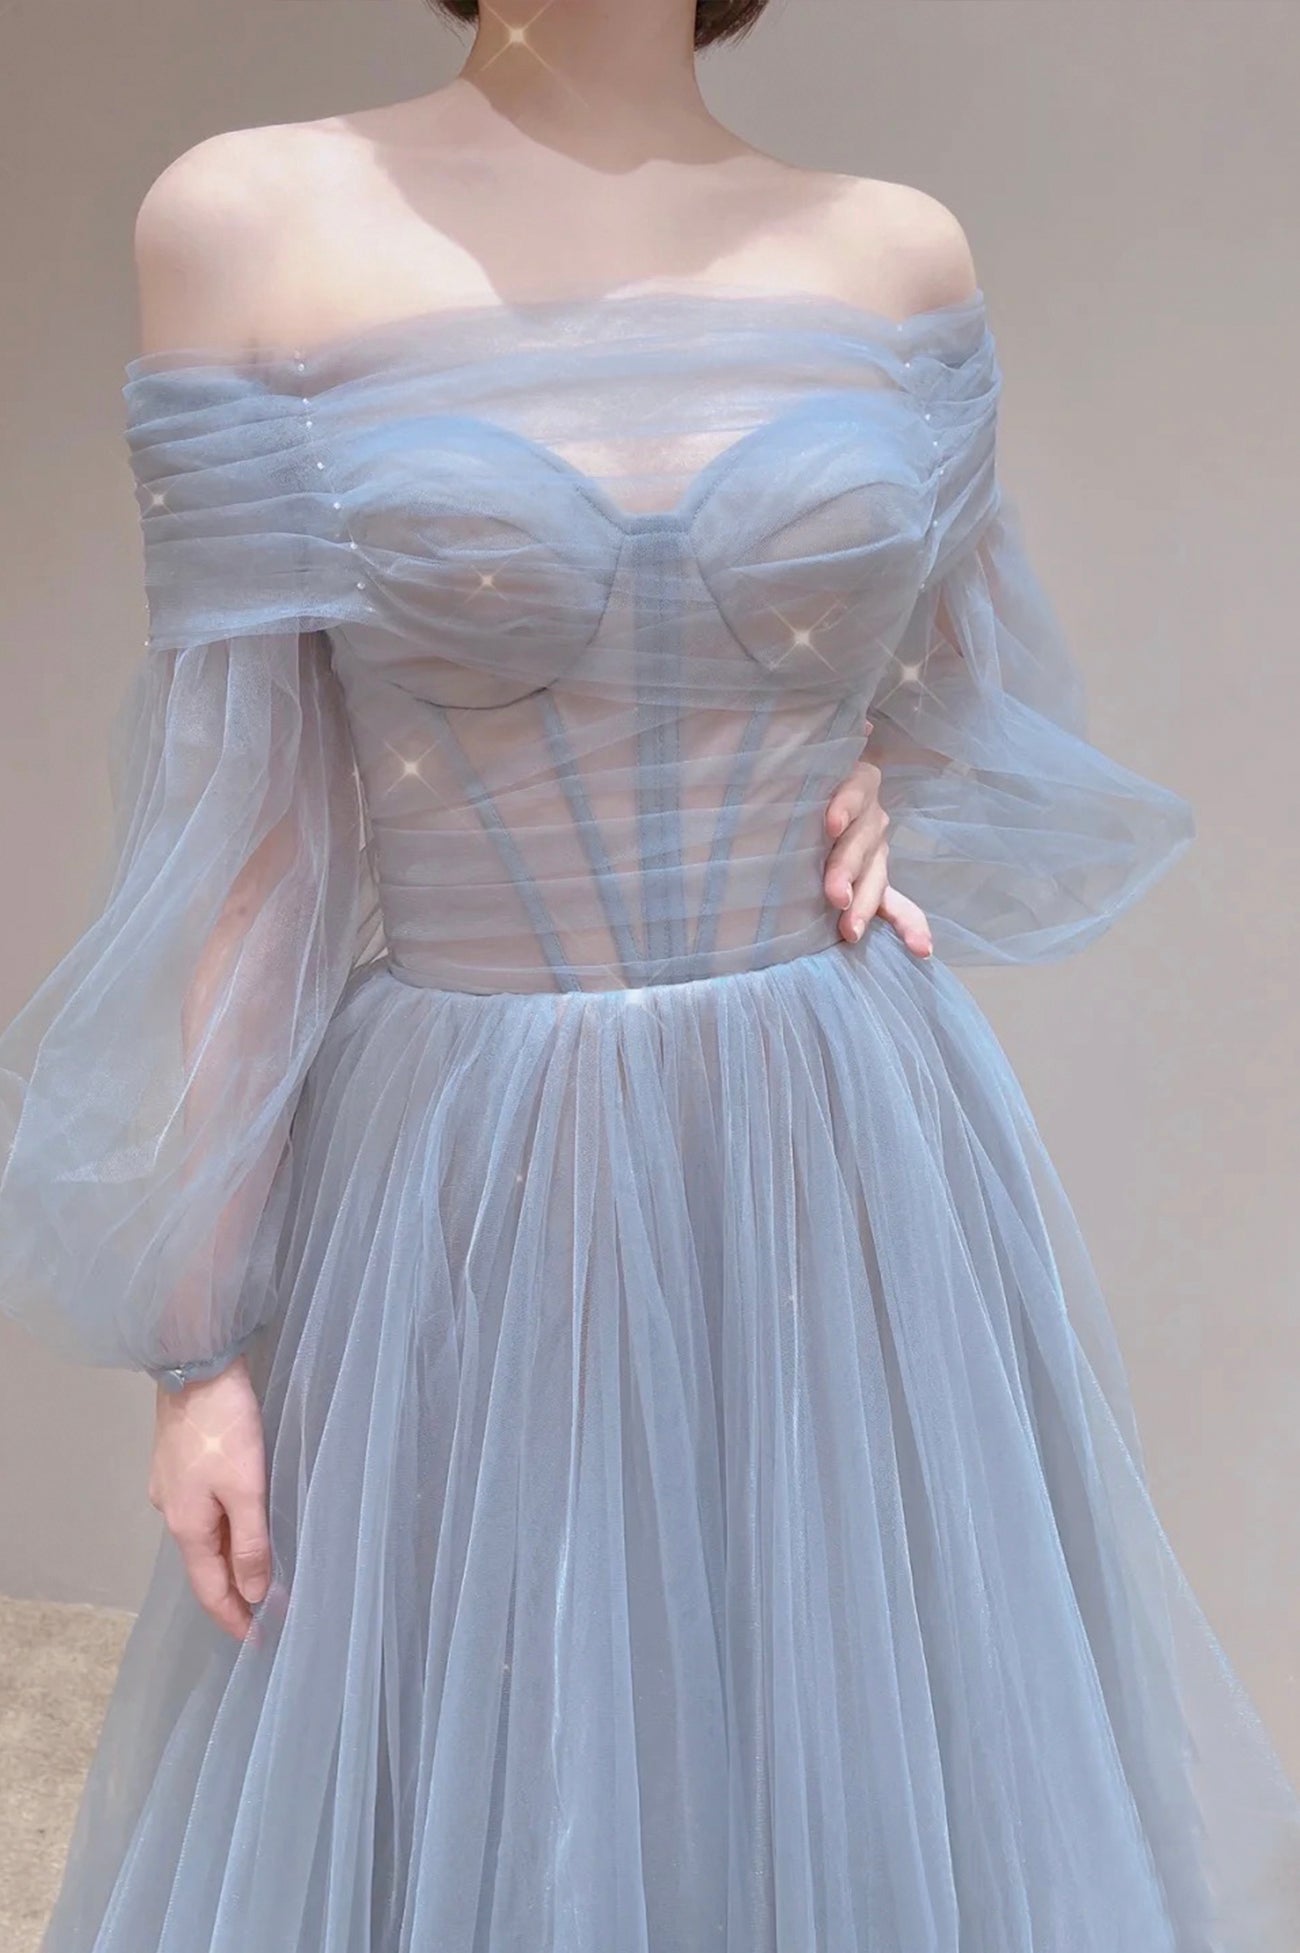 Blue Tulle Long Prom Dress, Beautiful Long Sleeve Tulle Evening Dress